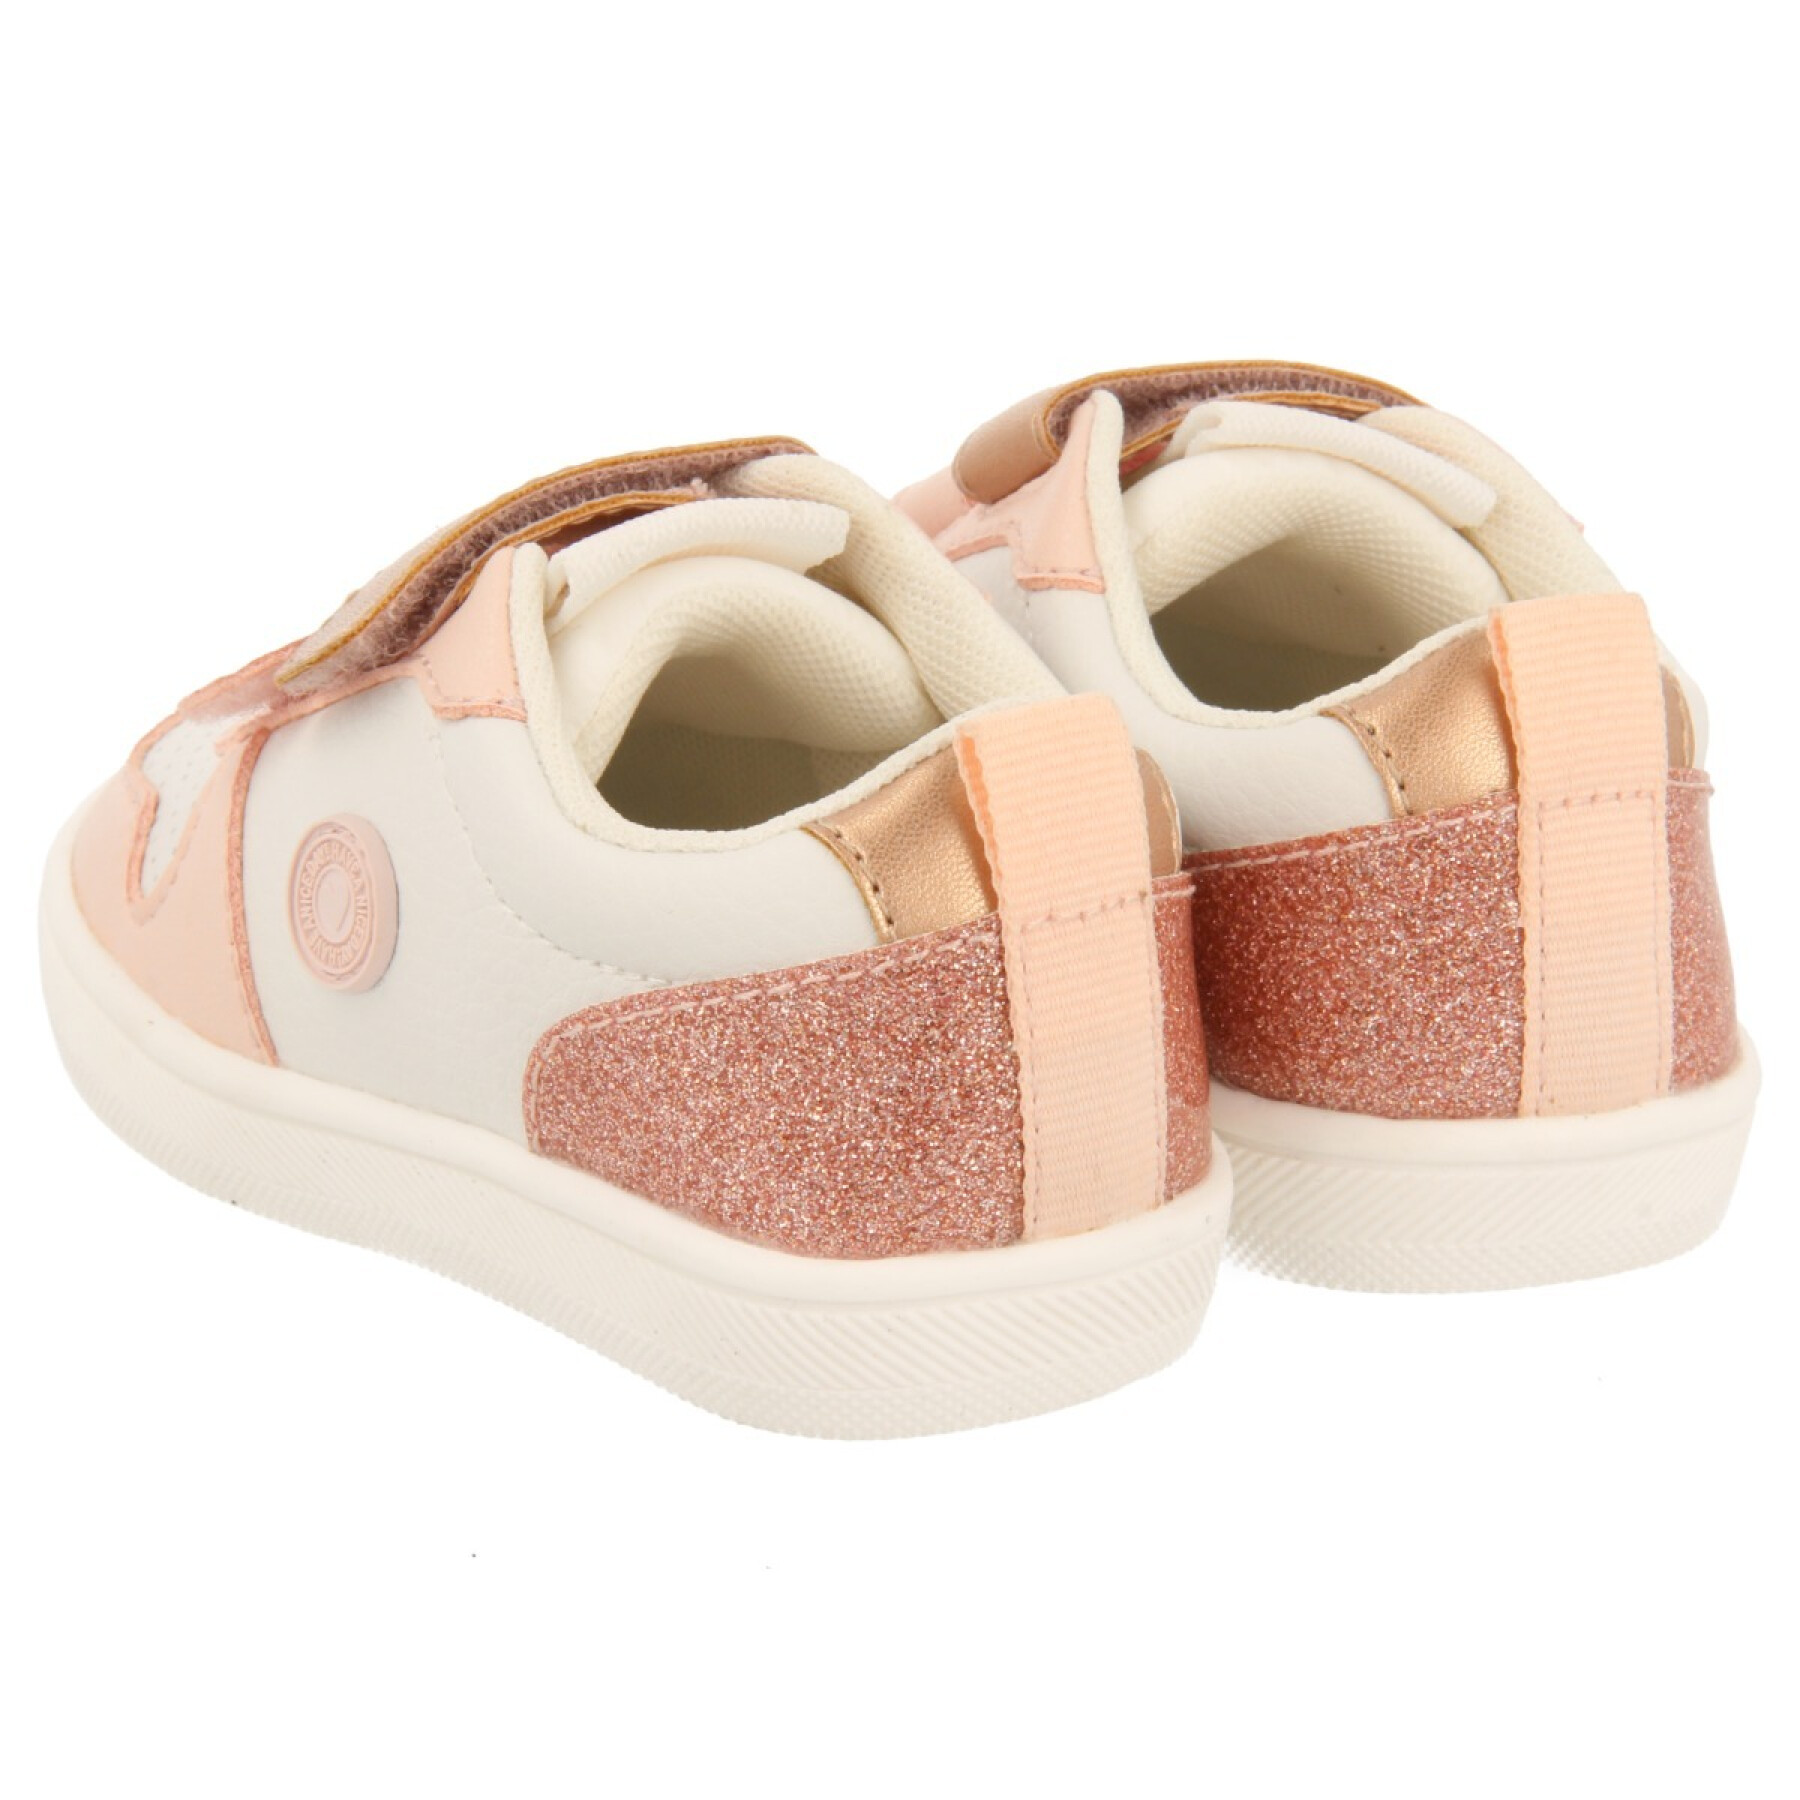 Babytrainers Gioseppo Riddle